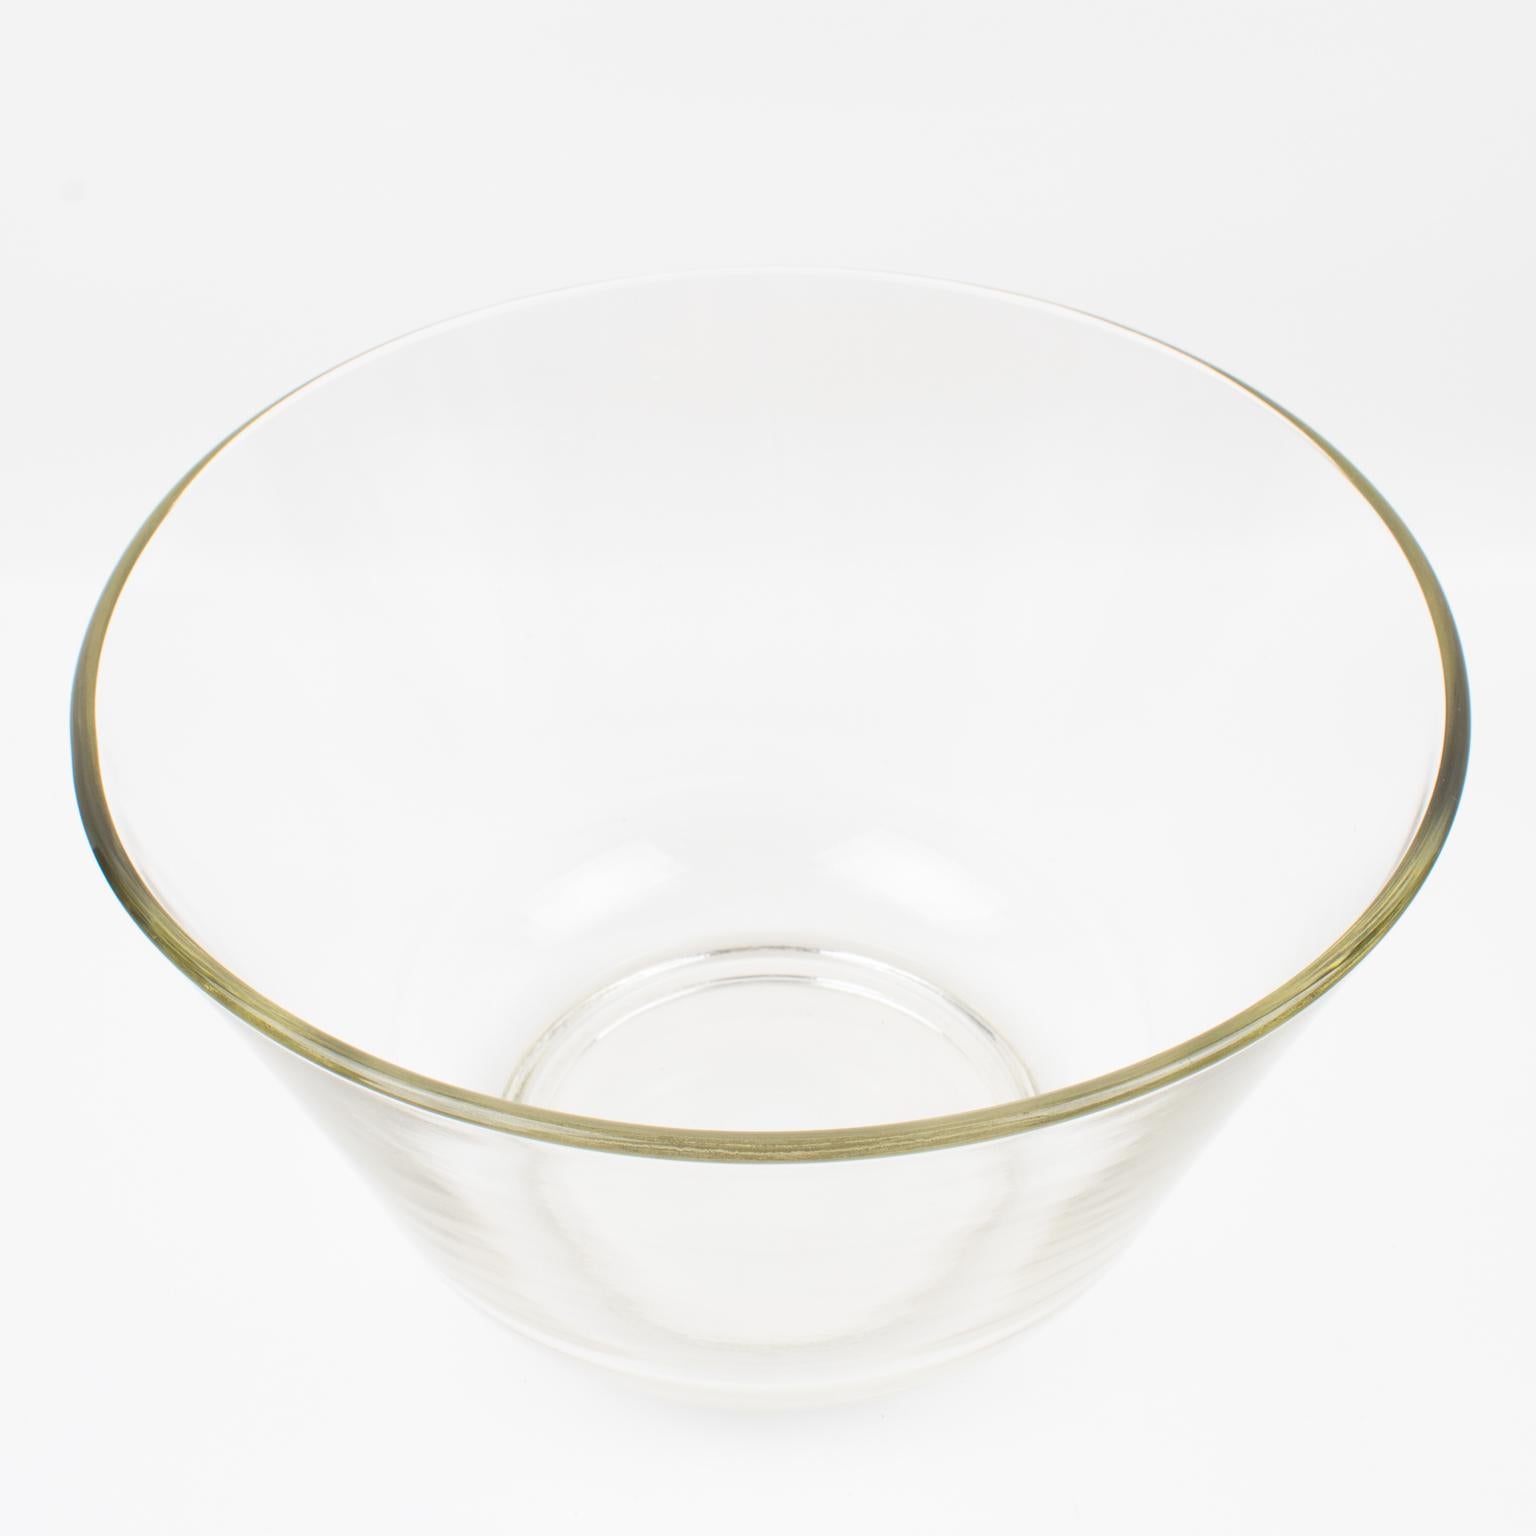 Modernist Gilt Metal and Glass Decorative Bowl Centerpiece, 1980s For Sale 3